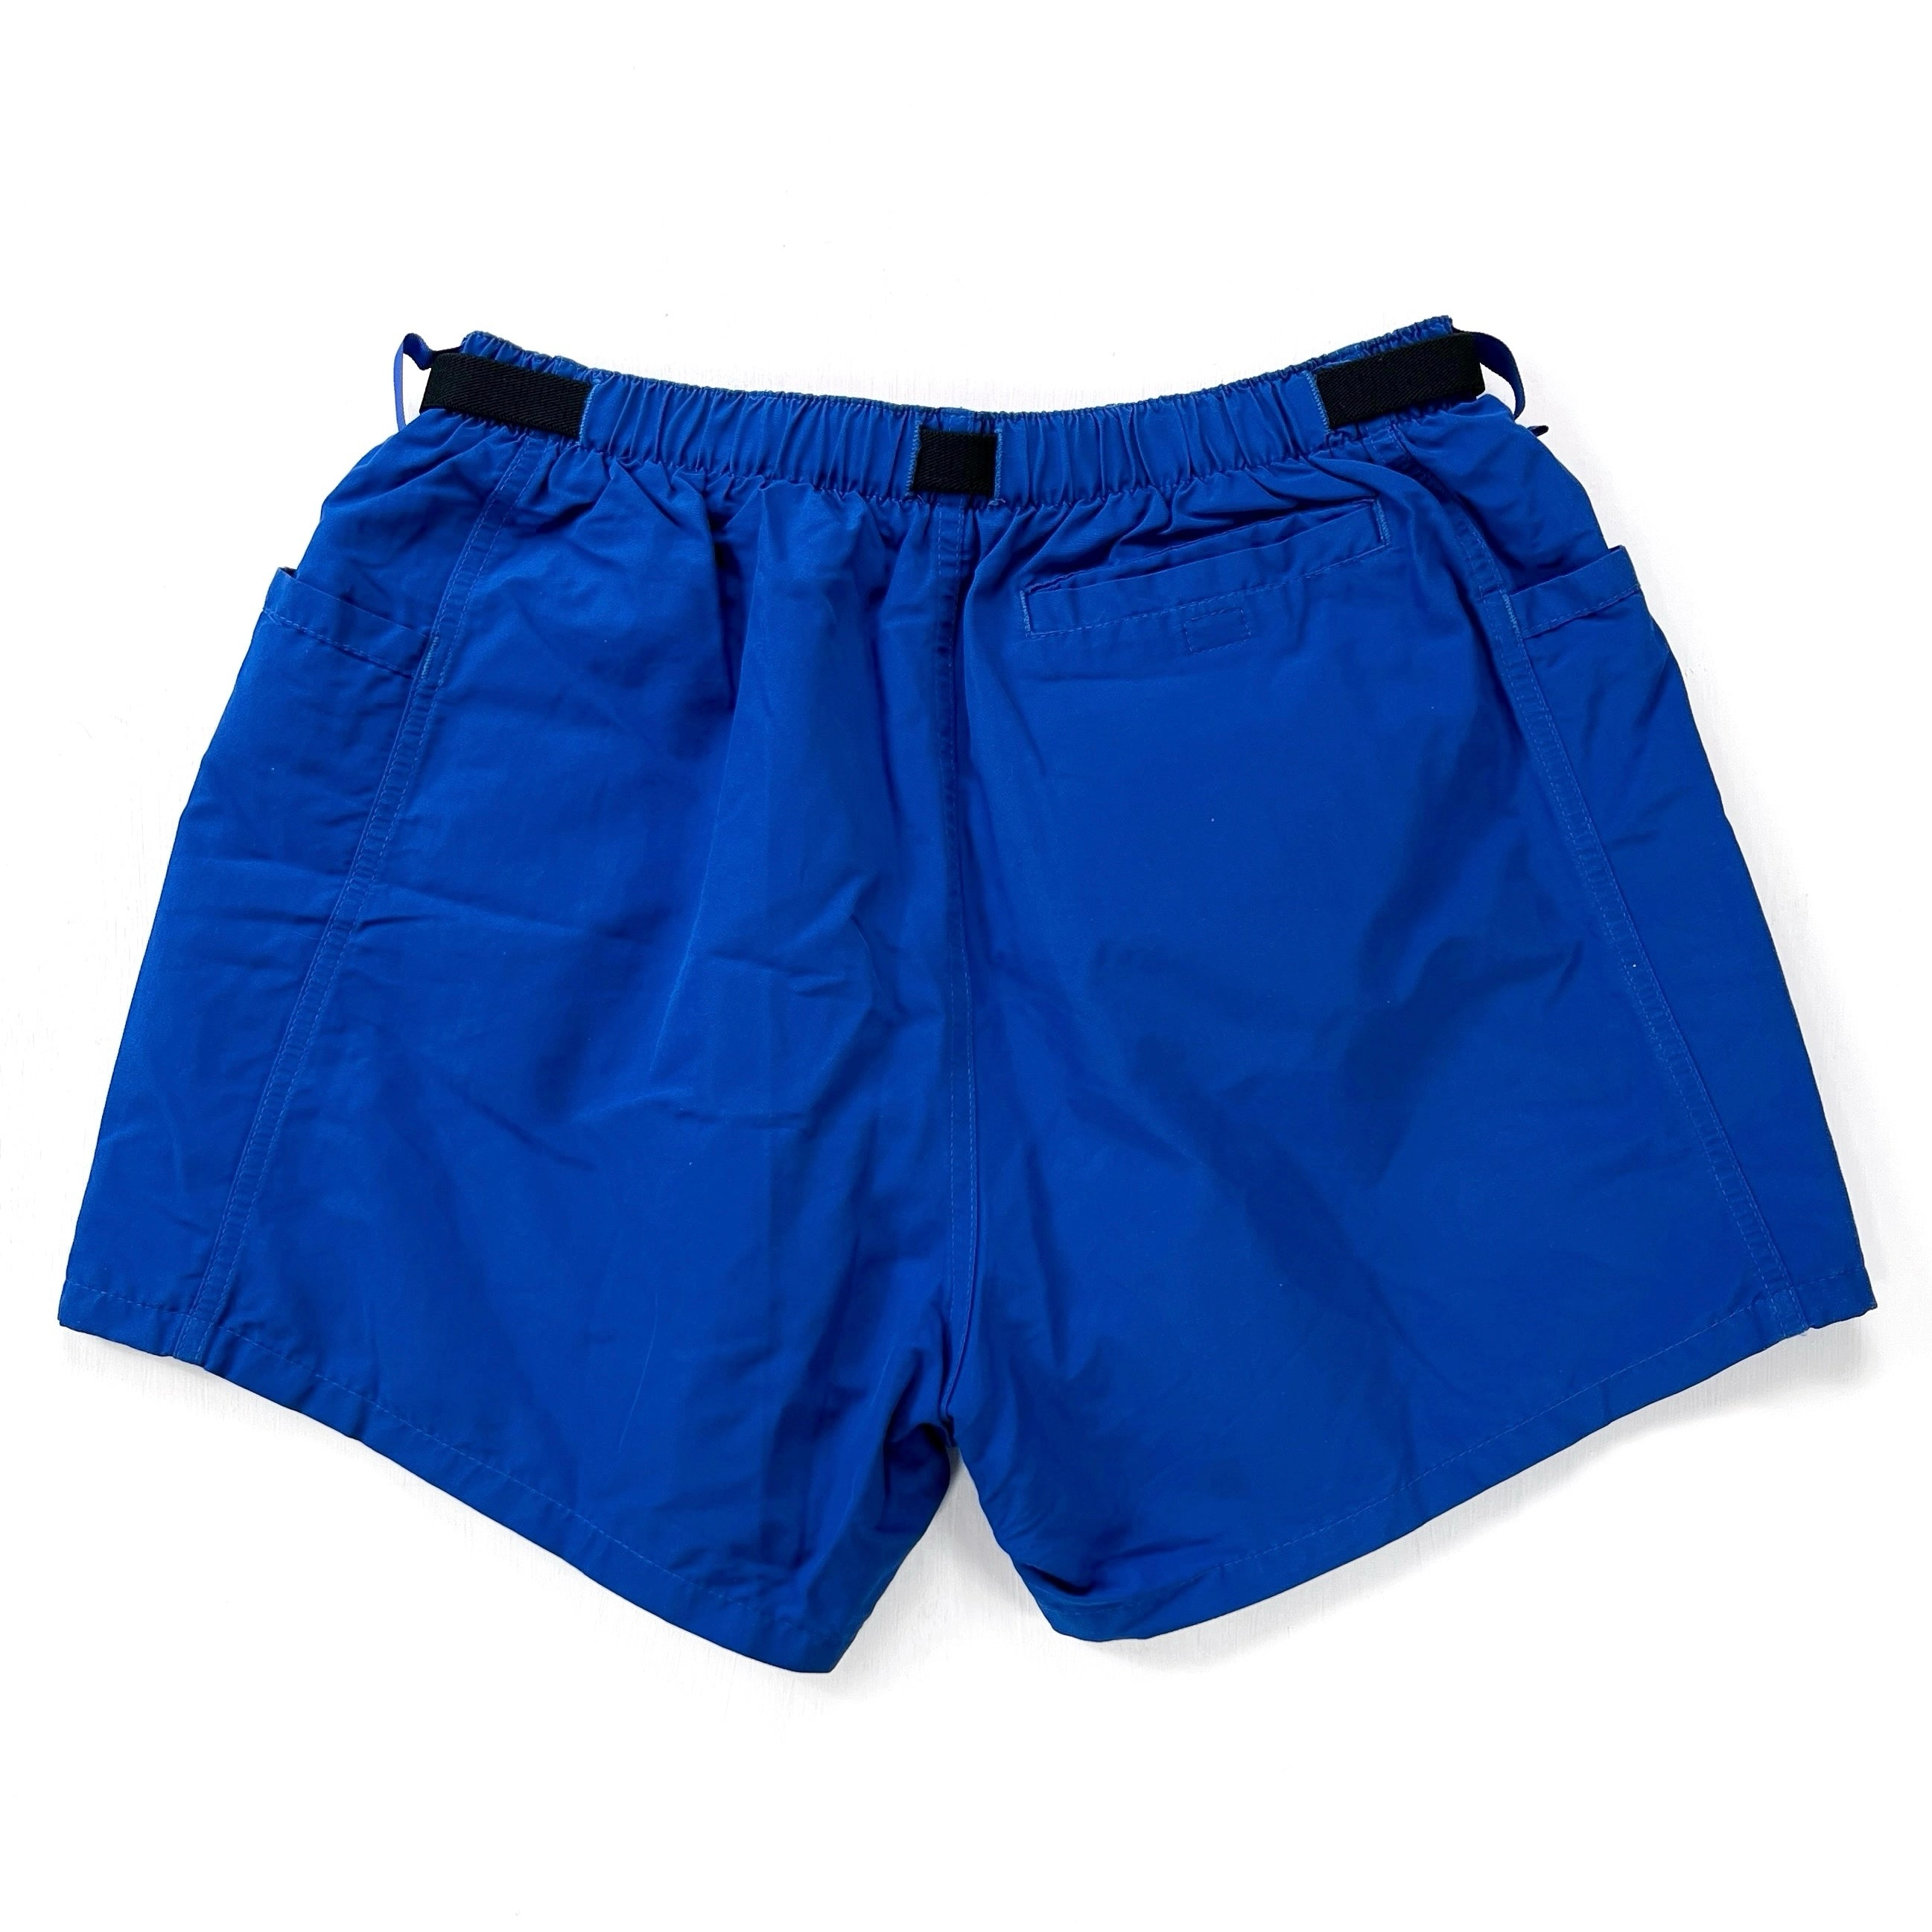 1989 Patagonia Made In The U.S.A. 4” Belted River Shorts, Cobalt (L)